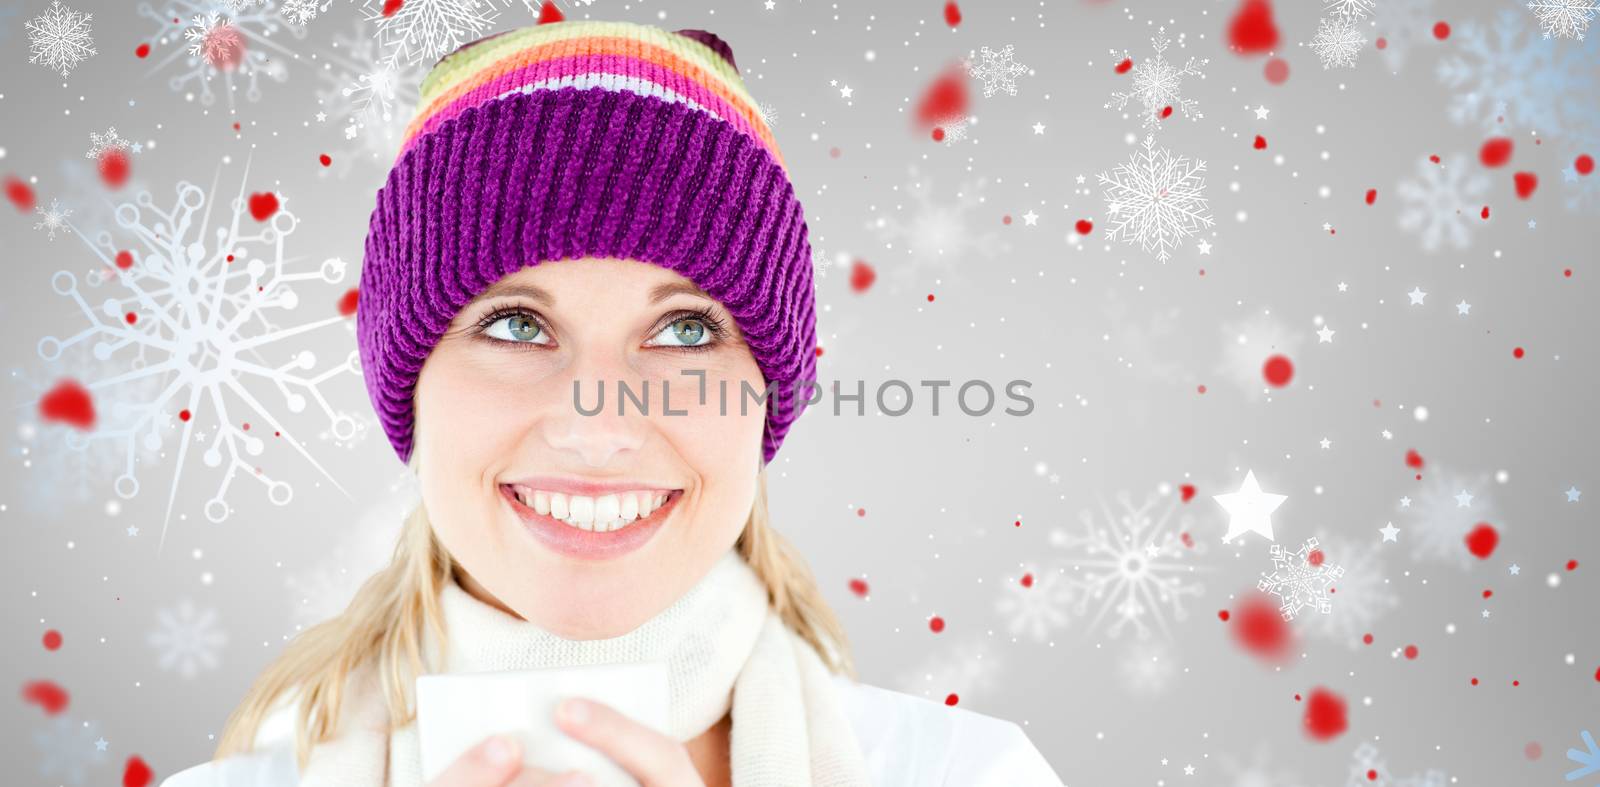 Smiling woman with a colorful hat and a cup in her hands against snowflake pattern